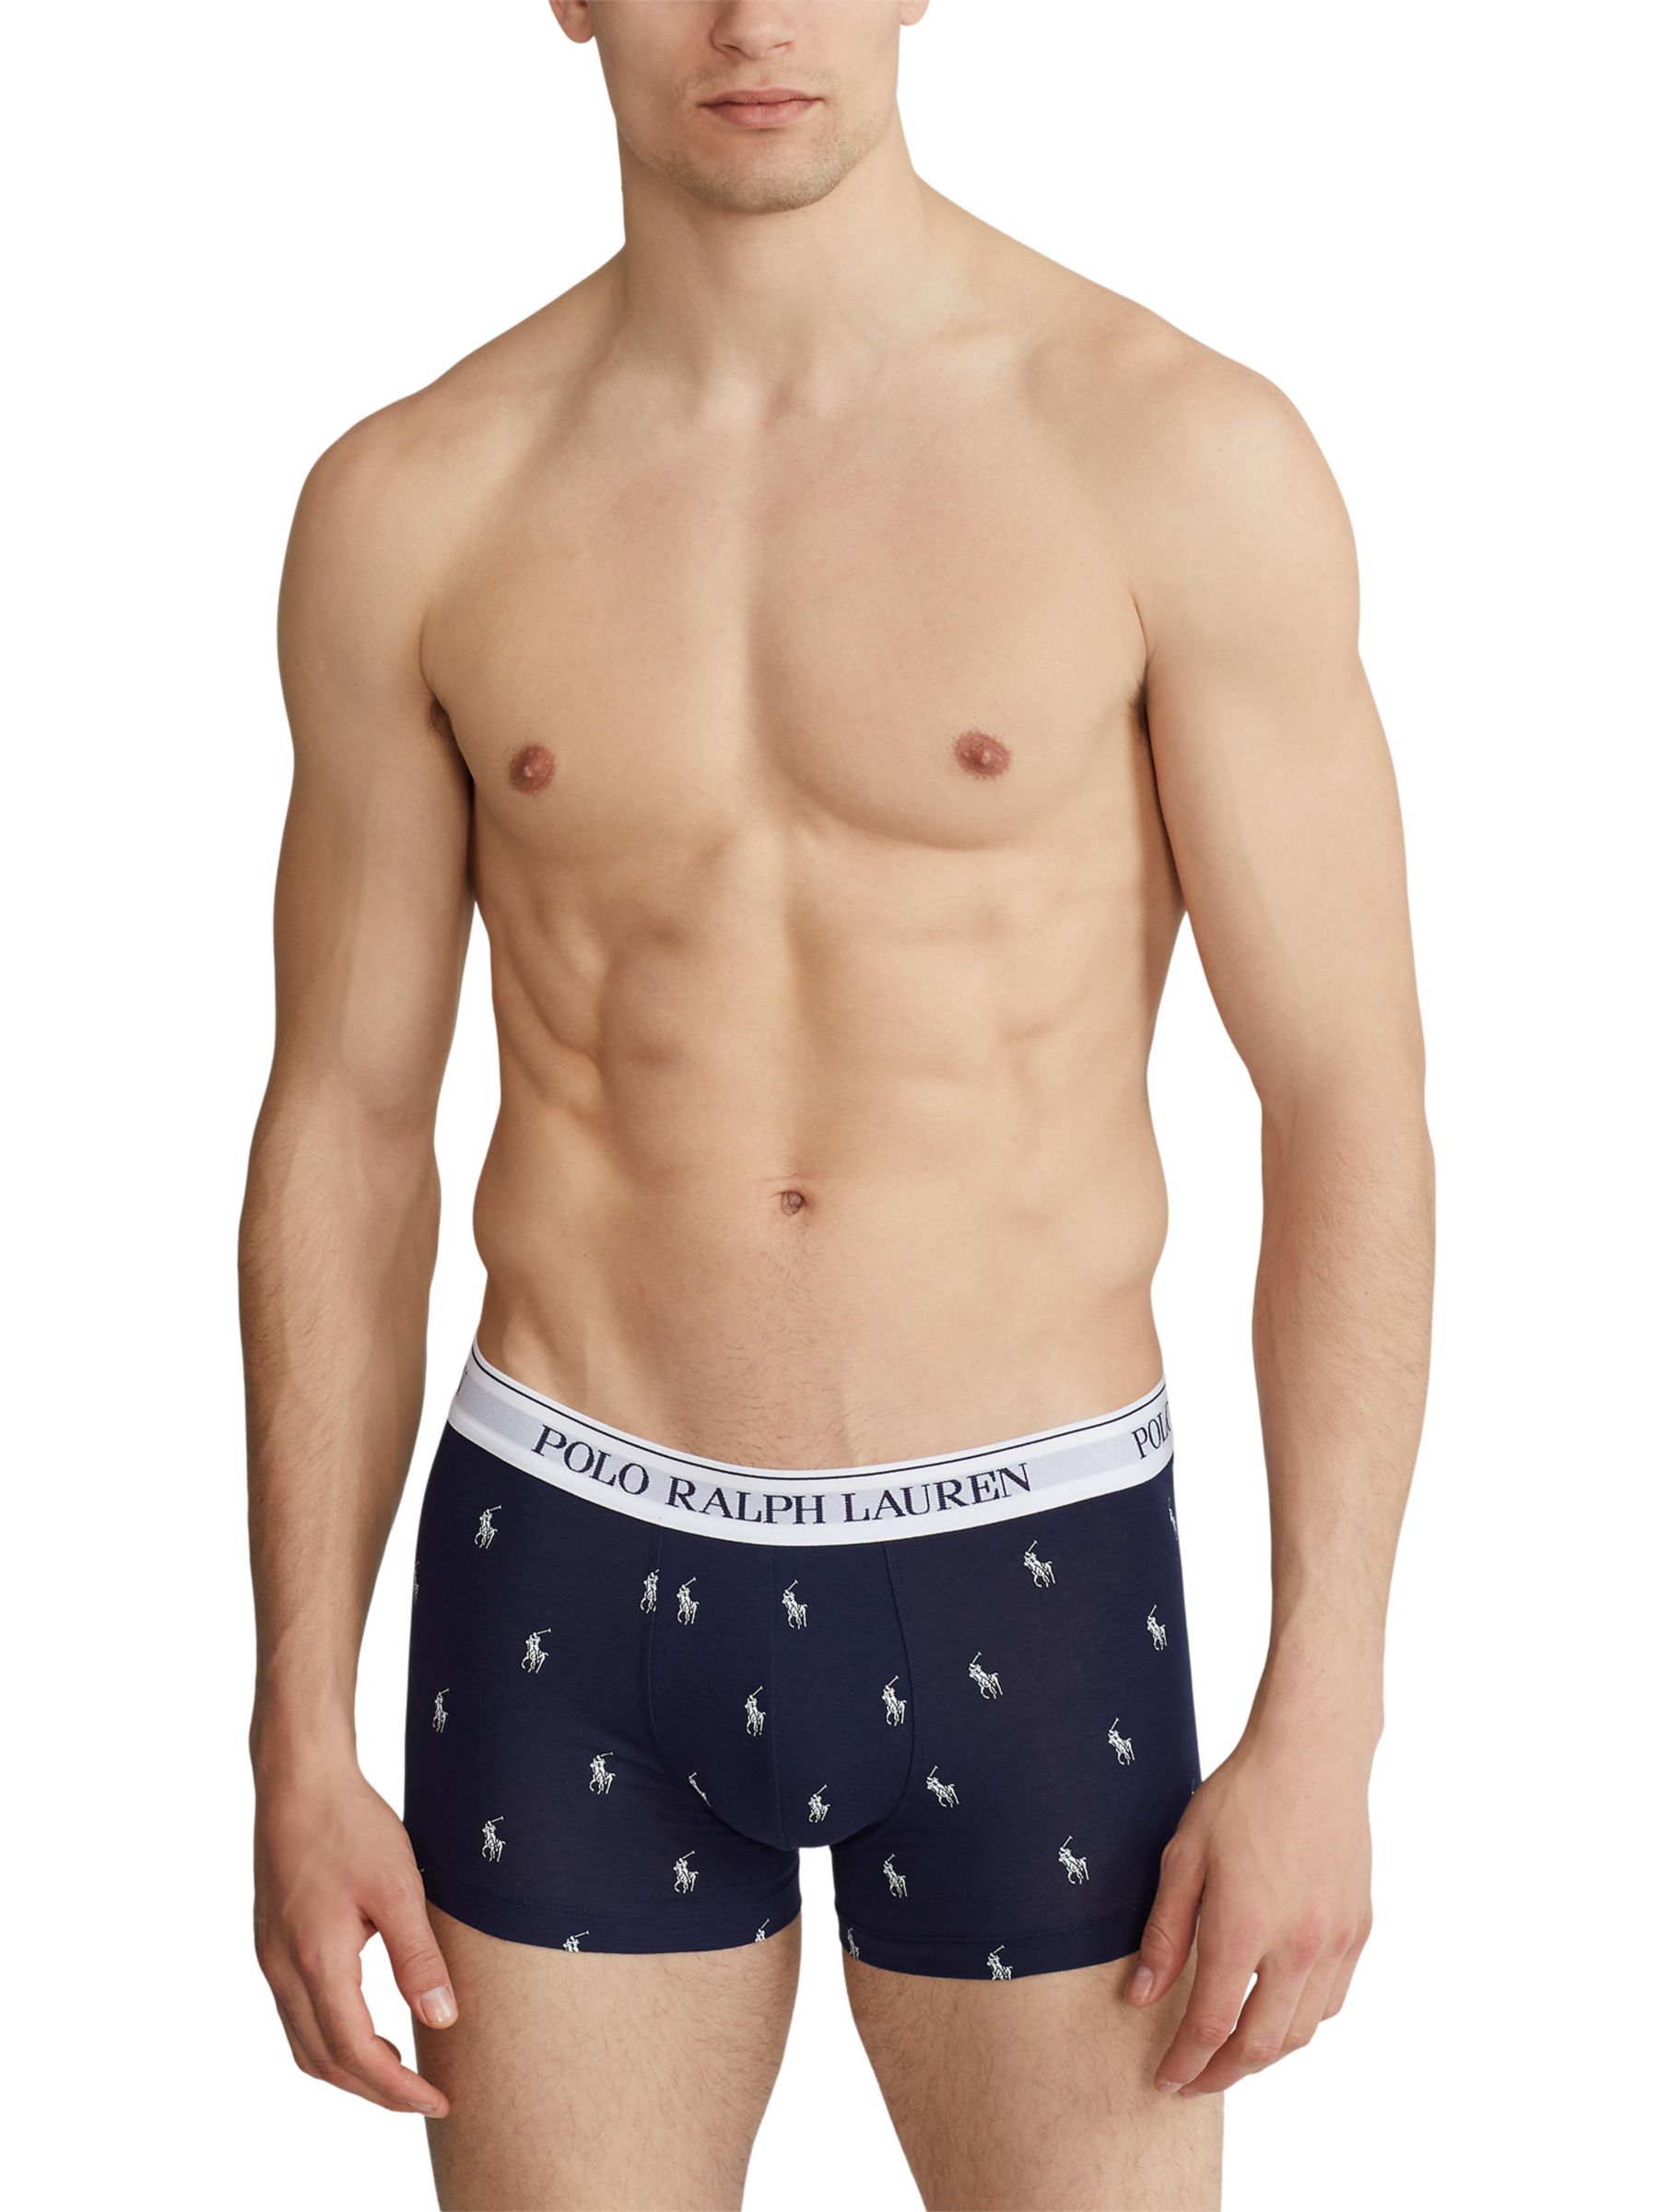 Polo Ralph Lauren Stretch Cotton Trunks, Pack of 3, Navy Print at